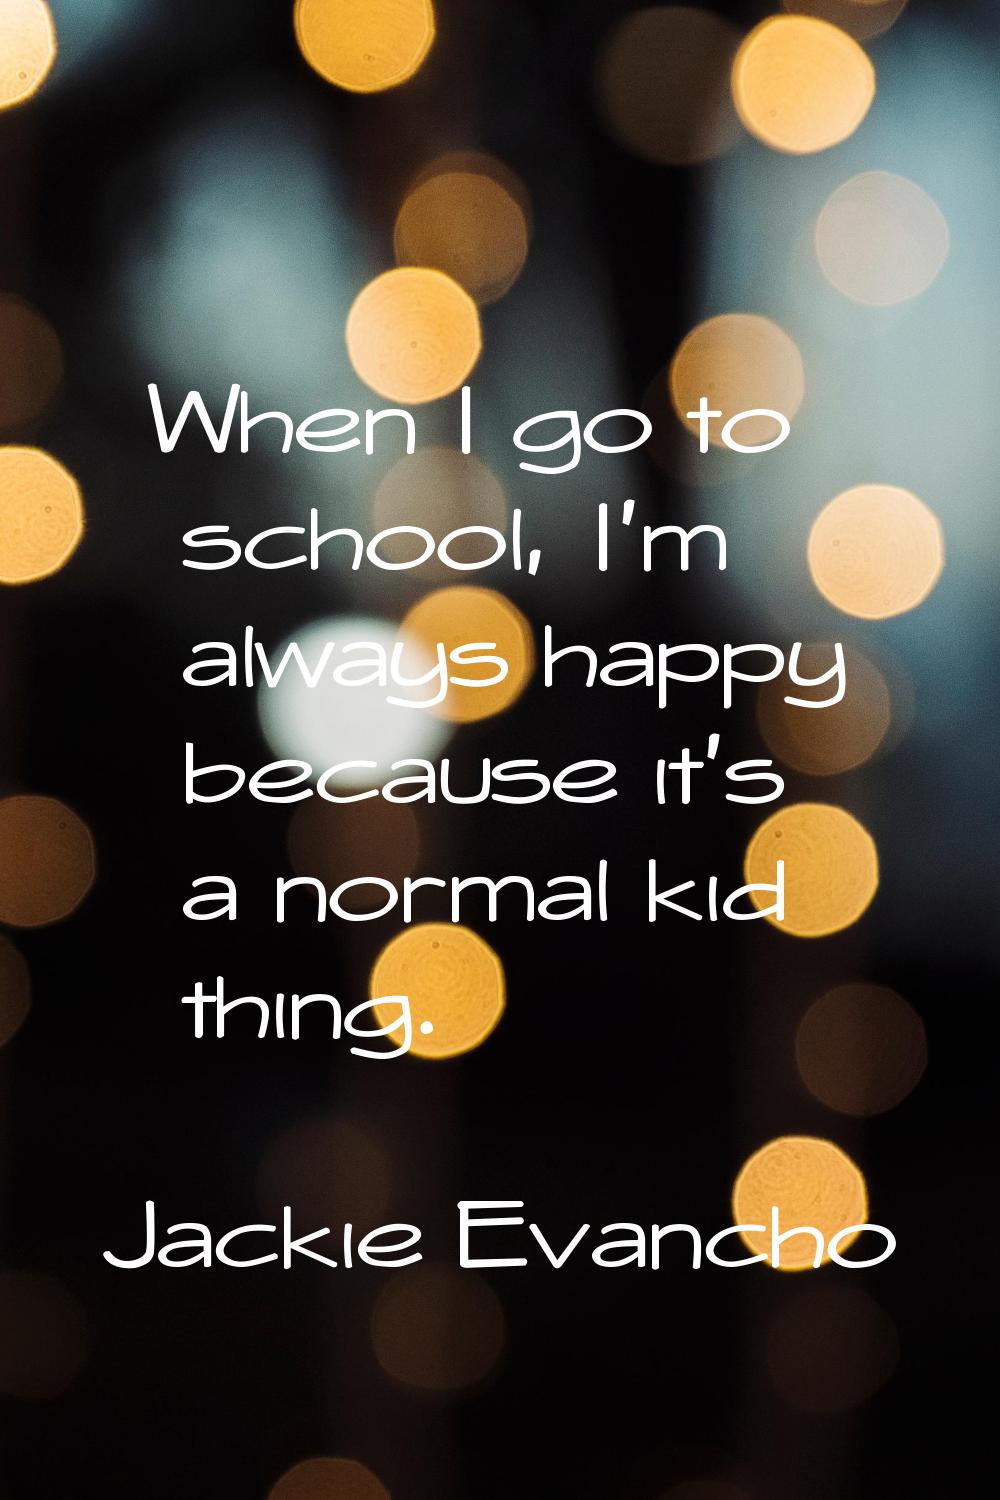 When I go to school, I'm always happy because it's a normal kid thing.